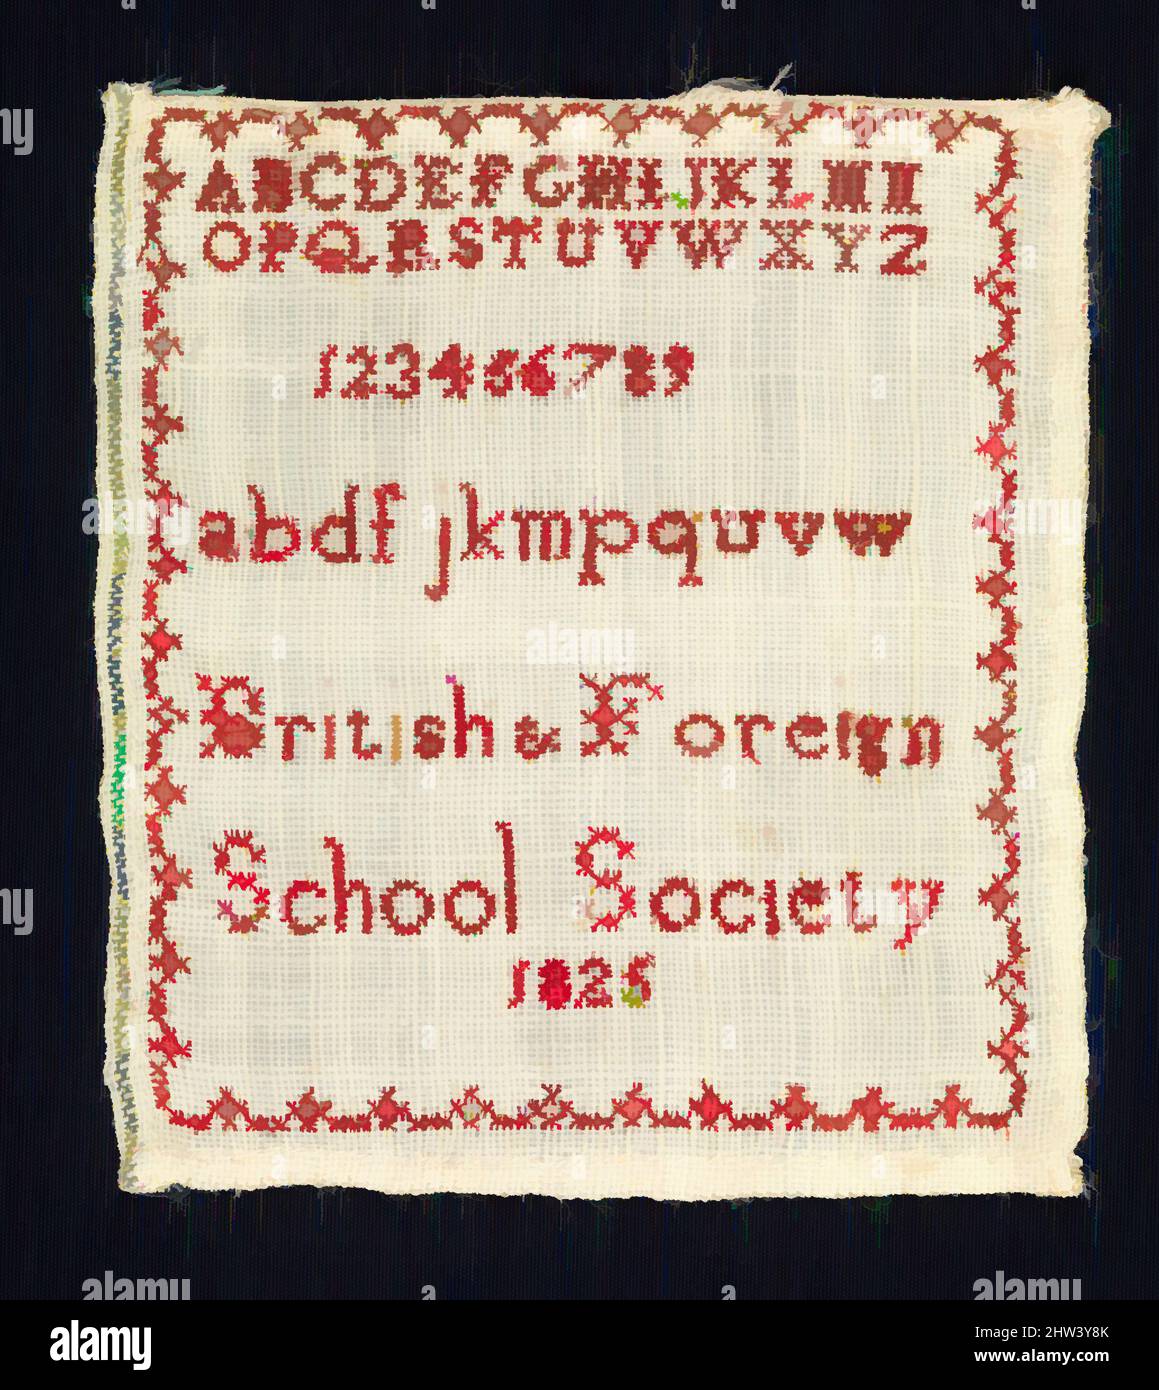 Art inspired by Sampler made at the British and Foreign School Society, 1825, British, Wool embroidery on cotton, H. 3 7/8 x W. 3 1/2 inches (9.8 x 8.9 cm), Textiles-Embroidered, This small sampler worked with the alphabet in upper and lower case, as well as number 1 through 9, Classic works modernized by Artotop with a splash of modernity. Shapes, color and value, eye-catching visual impact on art. Emotions through freedom of artworks in a contemporary way. A timeless message pursuing a wildly creative new direction. Artists turning to the digital medium and creating the Artotop NFT Stock Photo